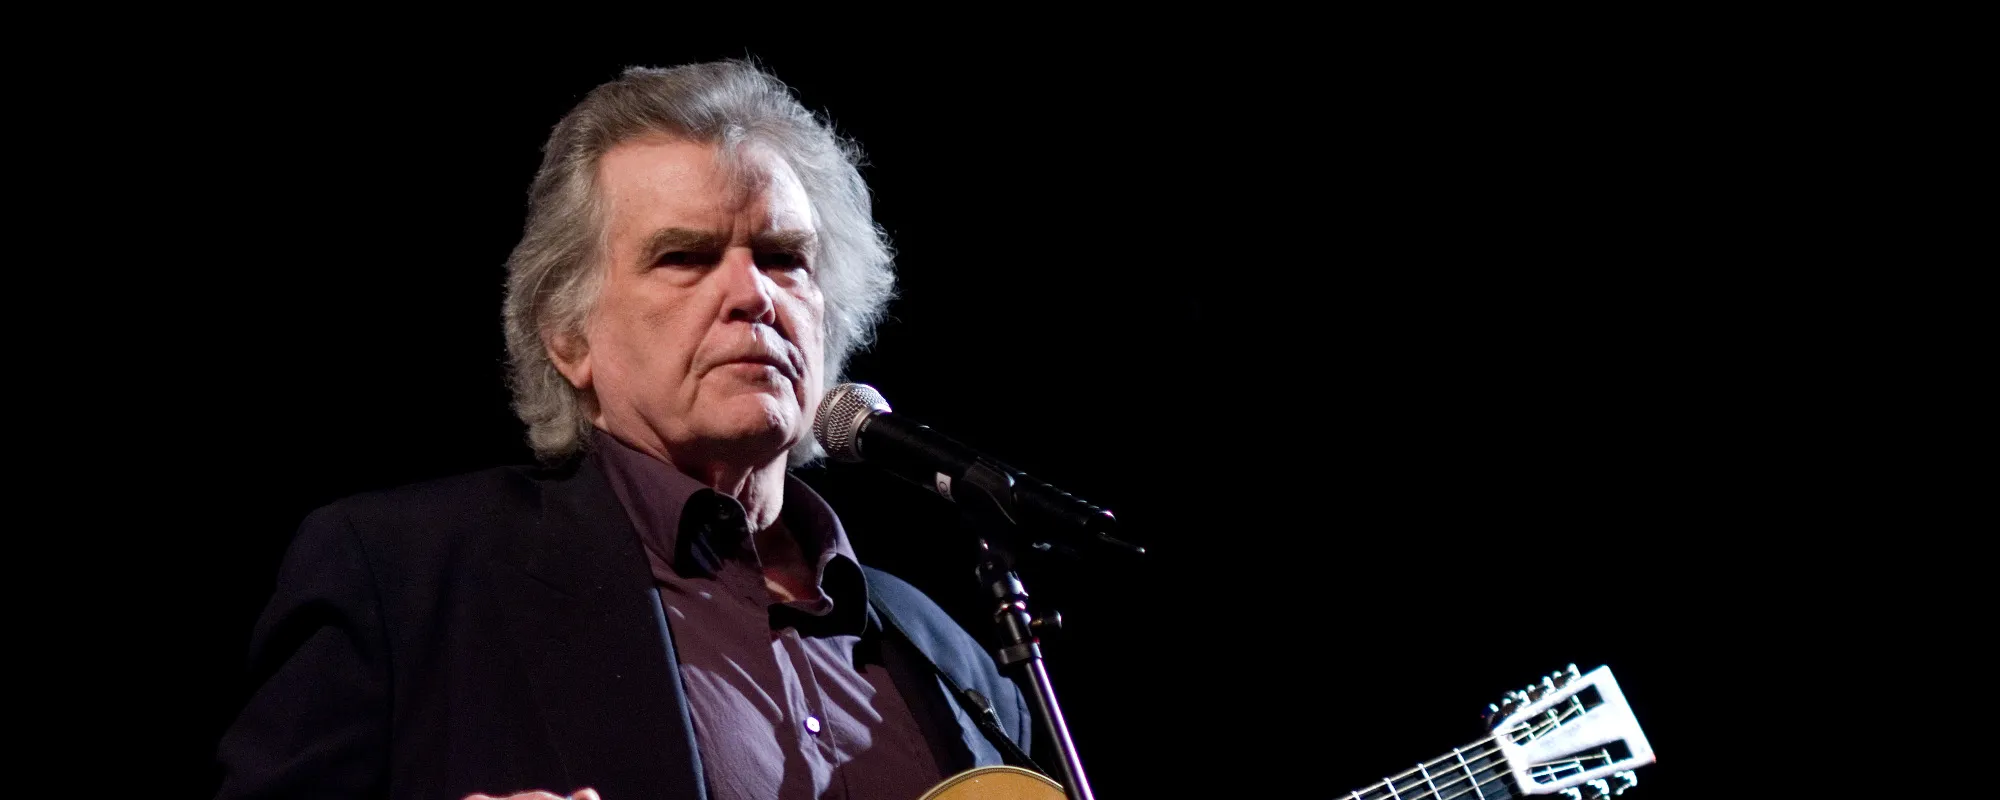 7 Songs You Didn’t Know Guy Clark Wrote for Other Artists